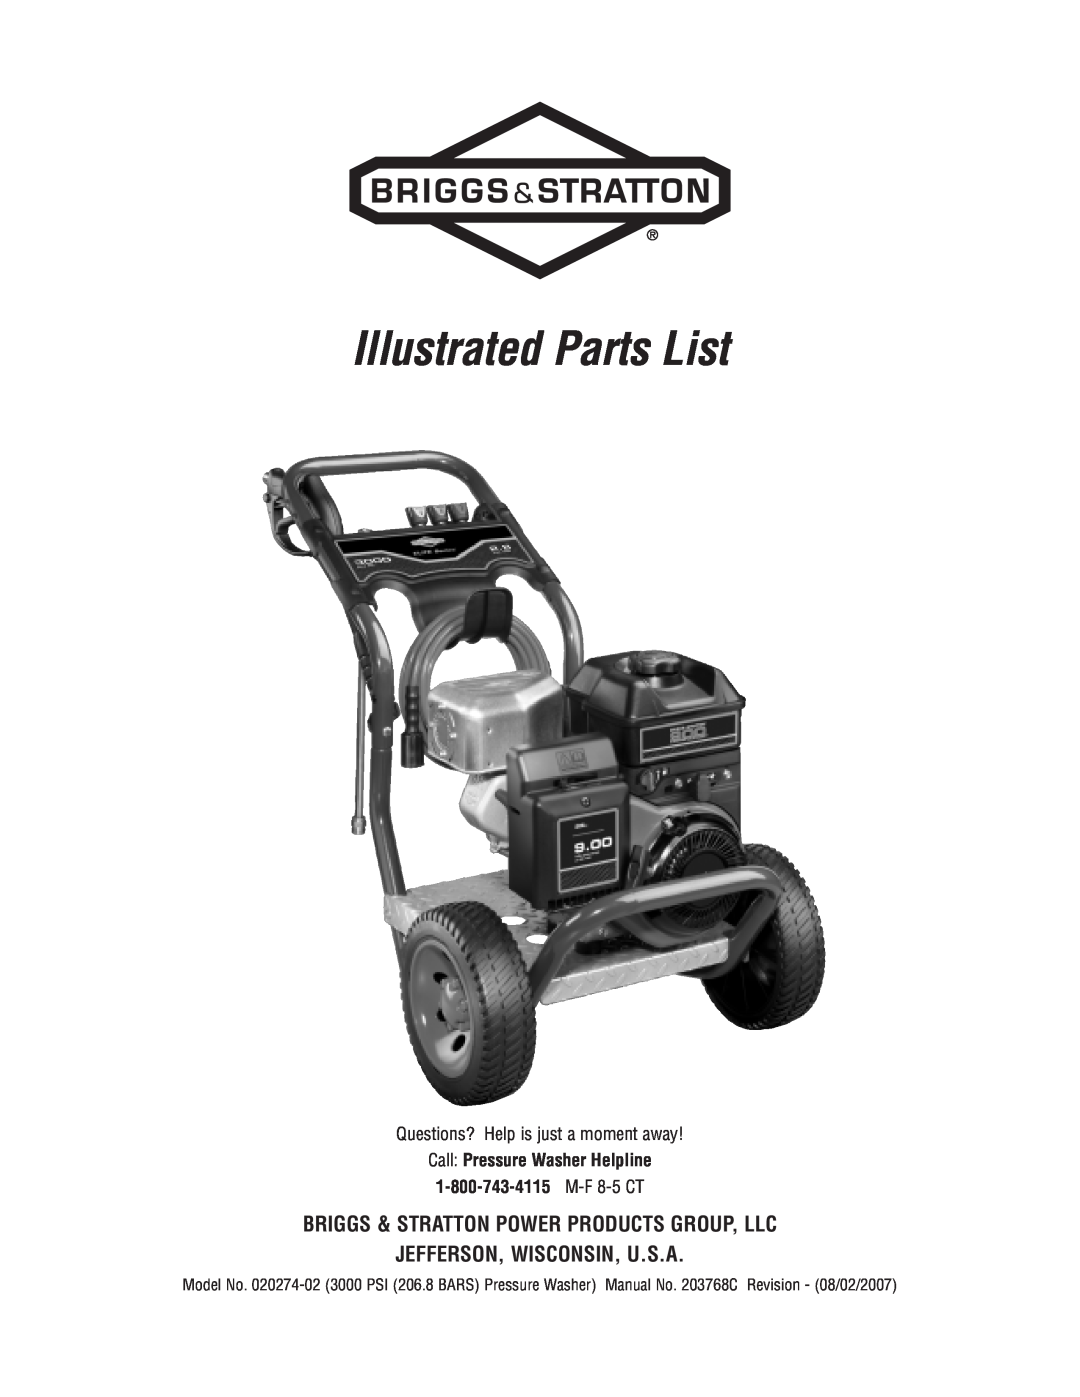 Briggs & Stratton 020274-02 manual Illustrated Parts List, Briggs & Stratton Power Products Group, Llc 